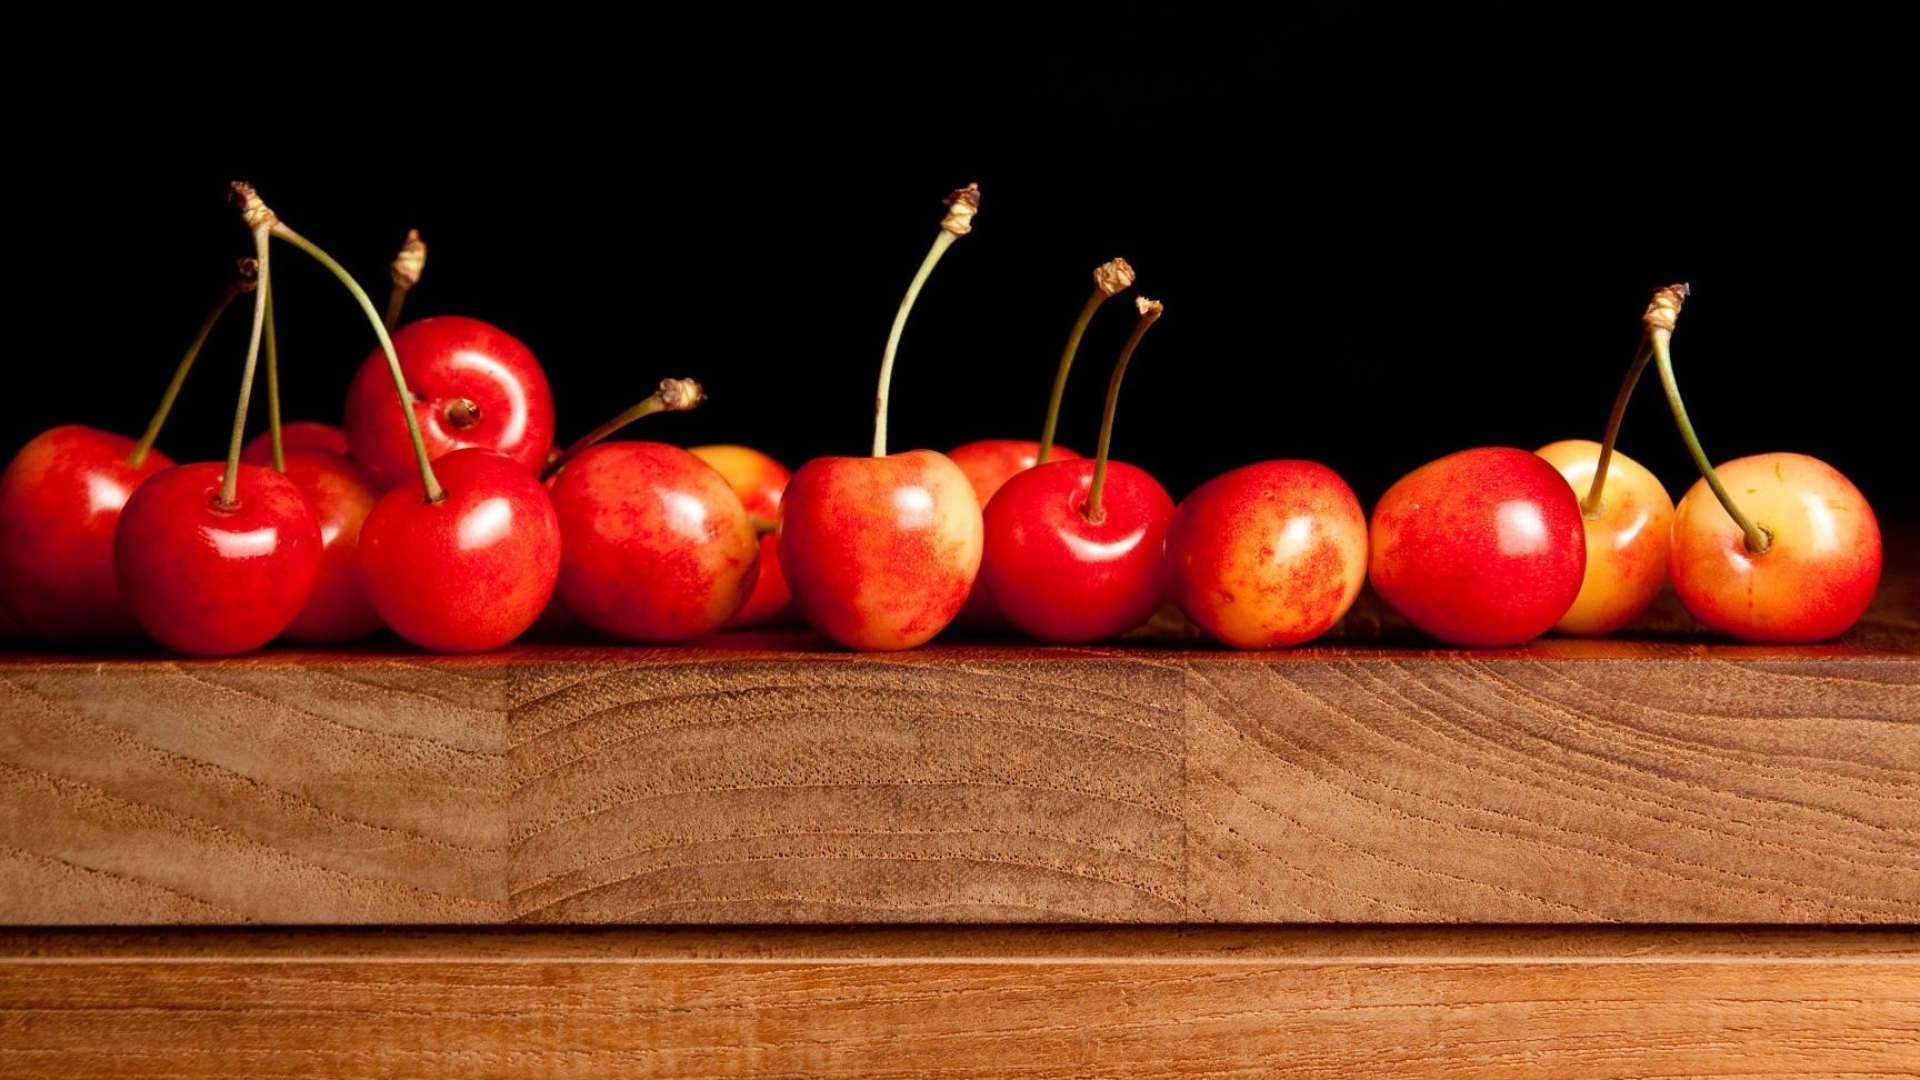 Cherry: Originated in Asia Minor in the fertile areas between the Black and Caspian seas. 1920x1080 Full HD Wallpaper.